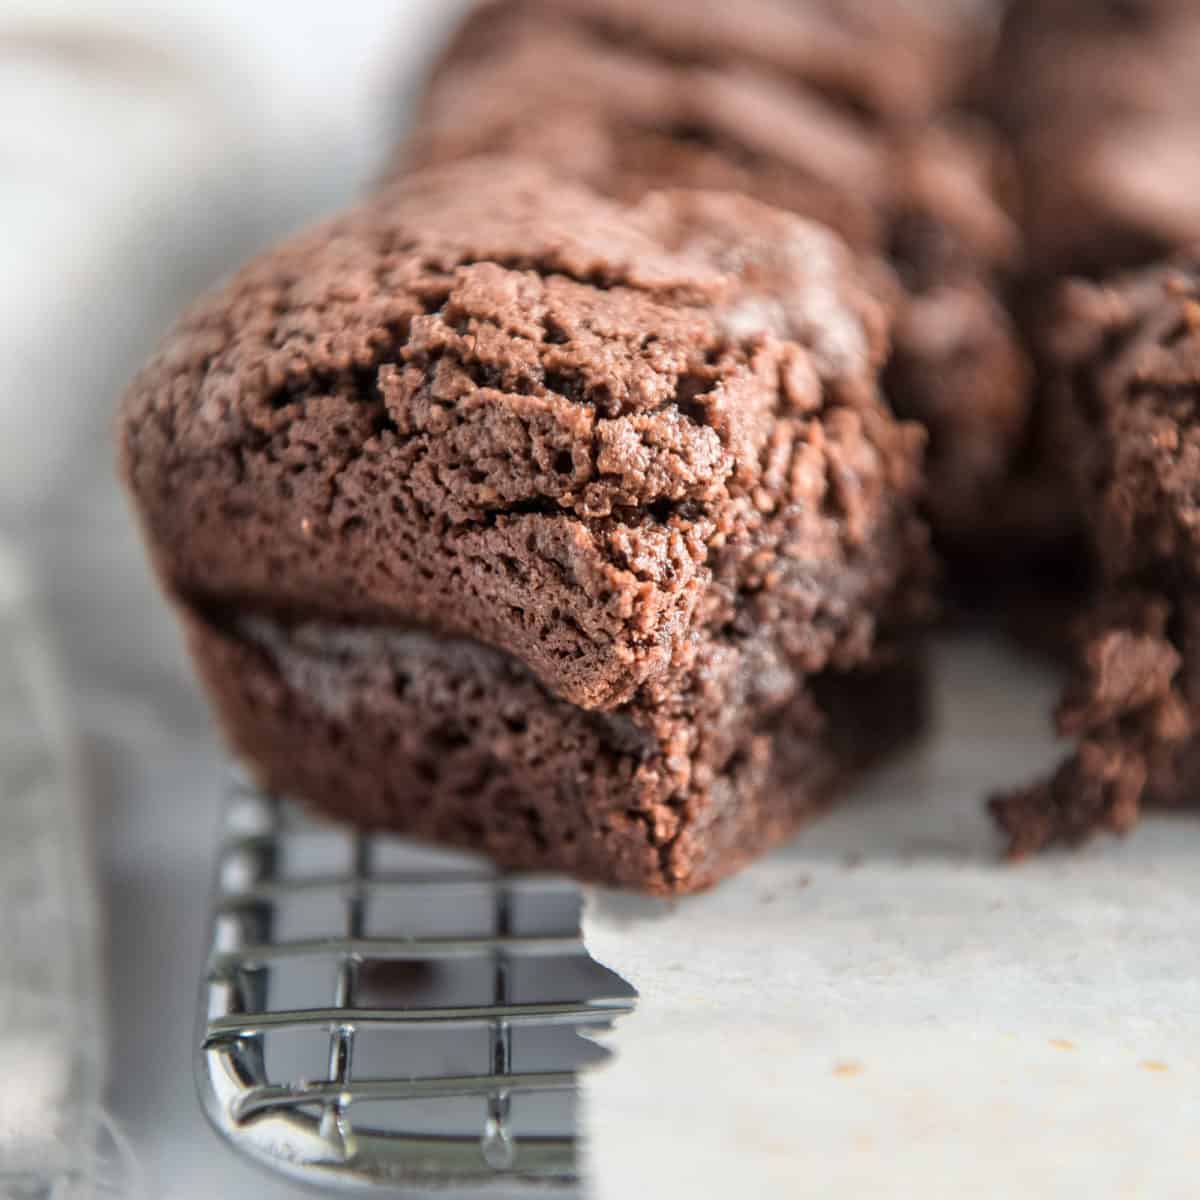 A close up of a brownie on a cooling rack.